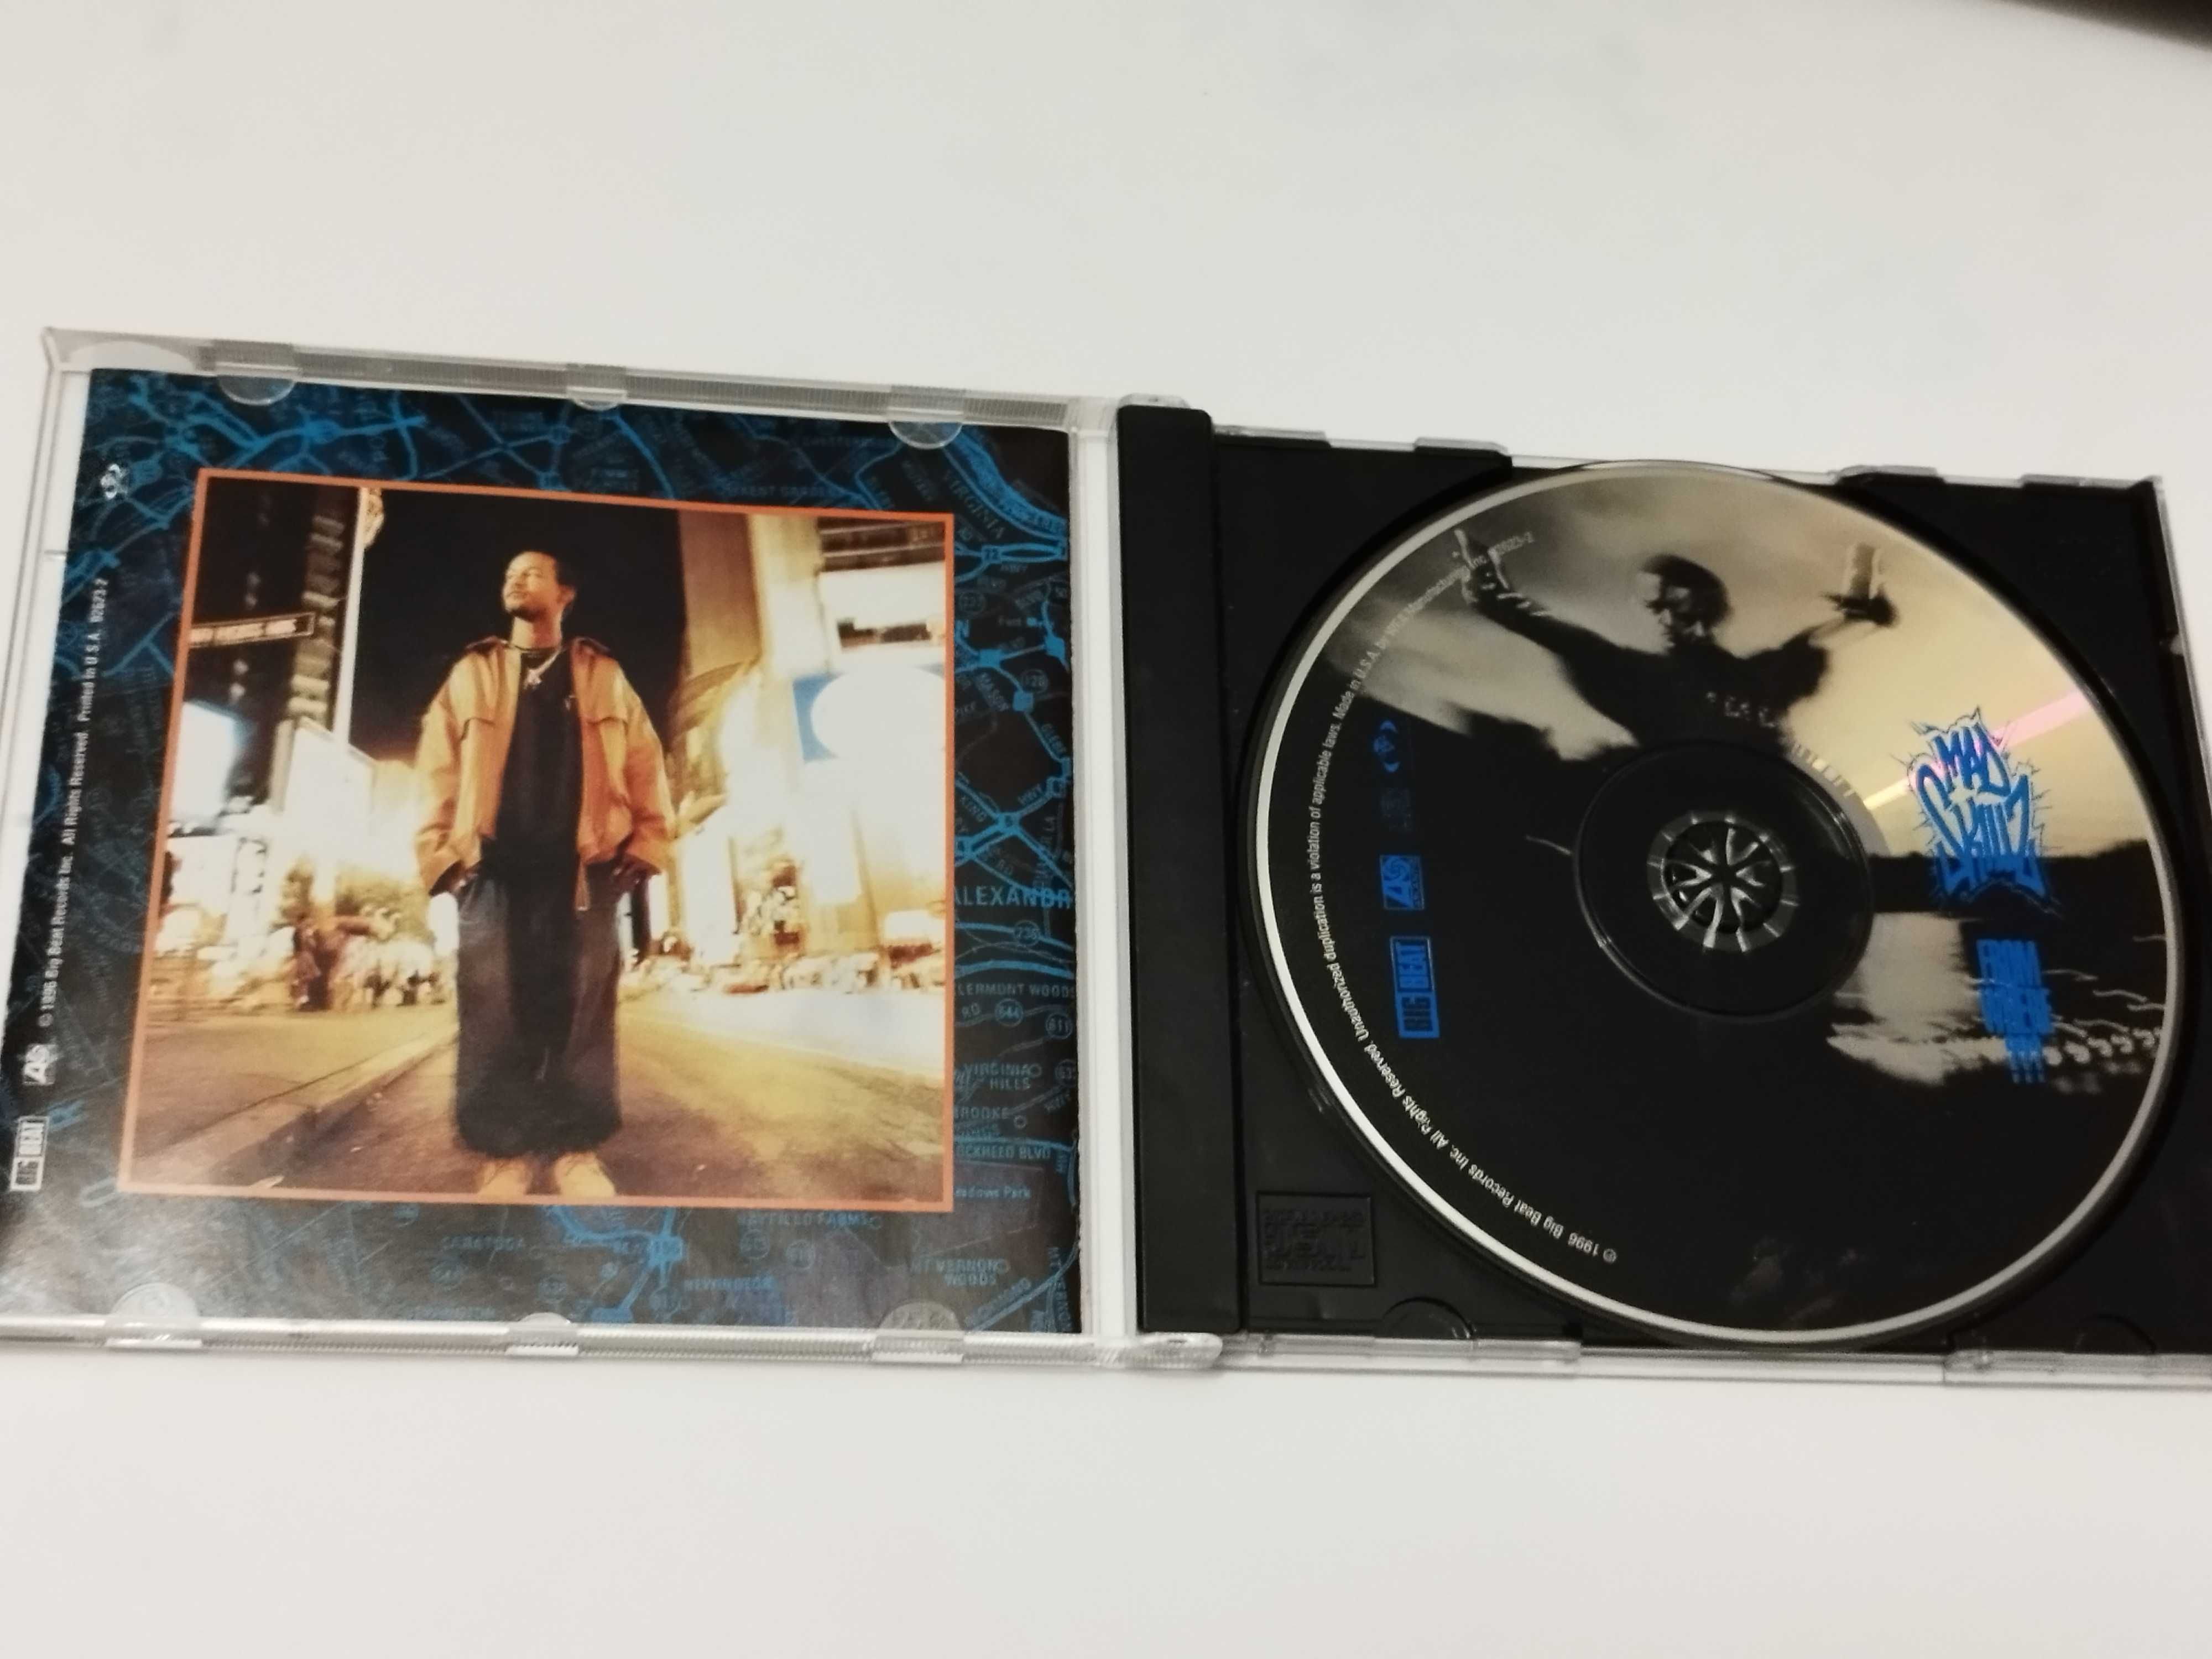 Mad Skillz - From Where??? - 1996 - US Rap - CD